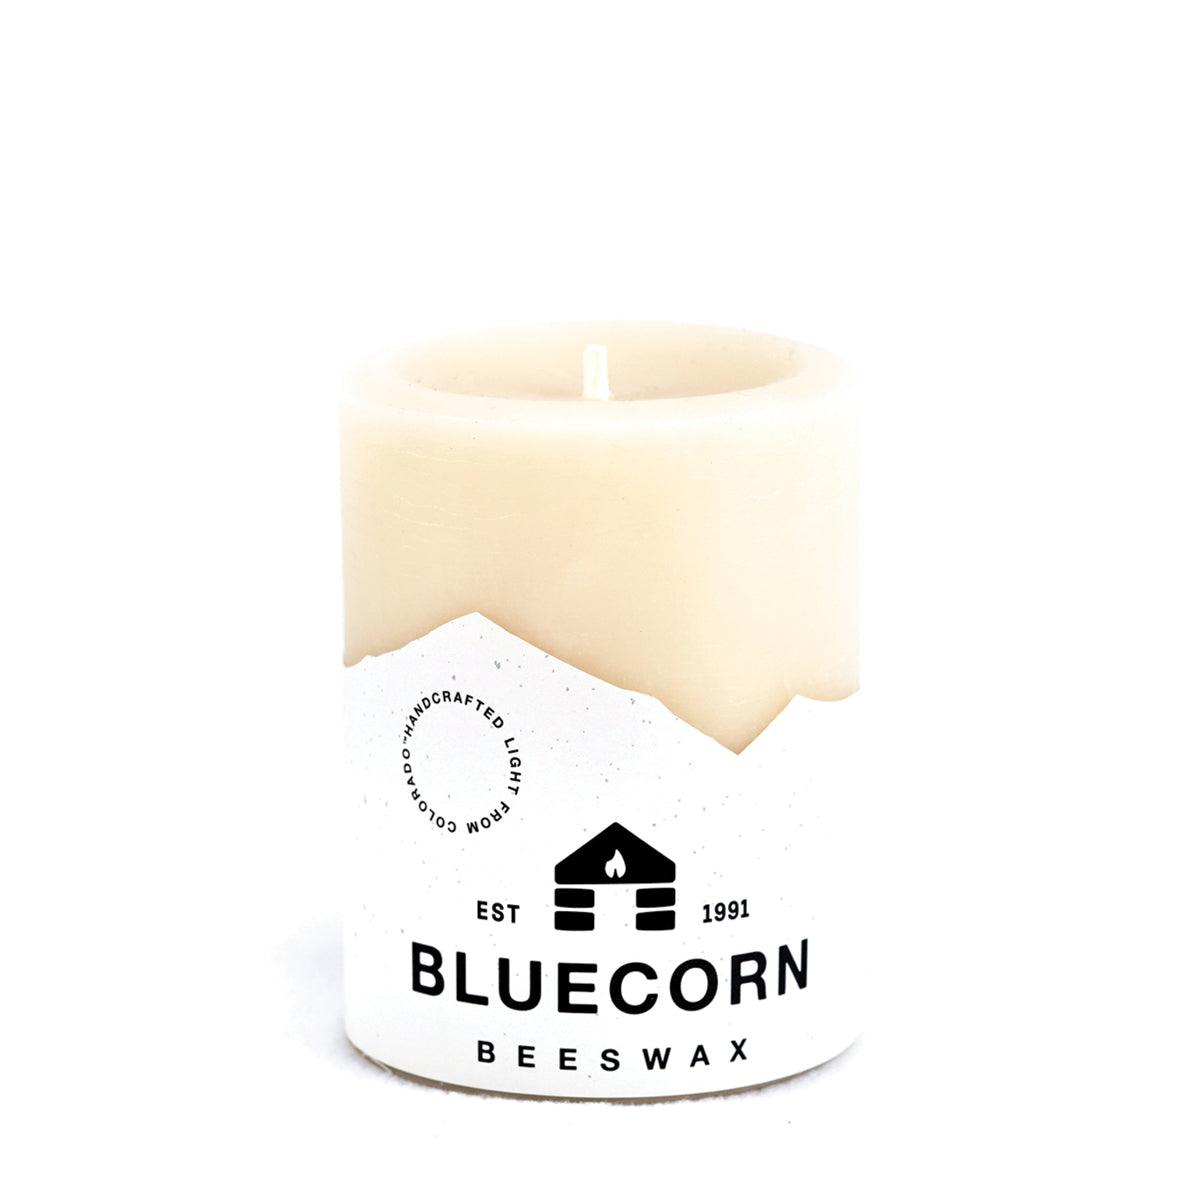 Bluecorn Beeswax 100% Pure Beeswax 3" x 4" Ivory Pillar Candle. Burn Time: 60 hours. Made with 100% Pure Beeswax, wax is white in color. Made with 100% pure cotton wick, no lead and paraffin free. Clean burning and non-toxic. Features Bluecorn Beeswax label printed on 100% recycled paper. Clearance items might have an odd blemish or air bubble, but will still burn beautifully. 